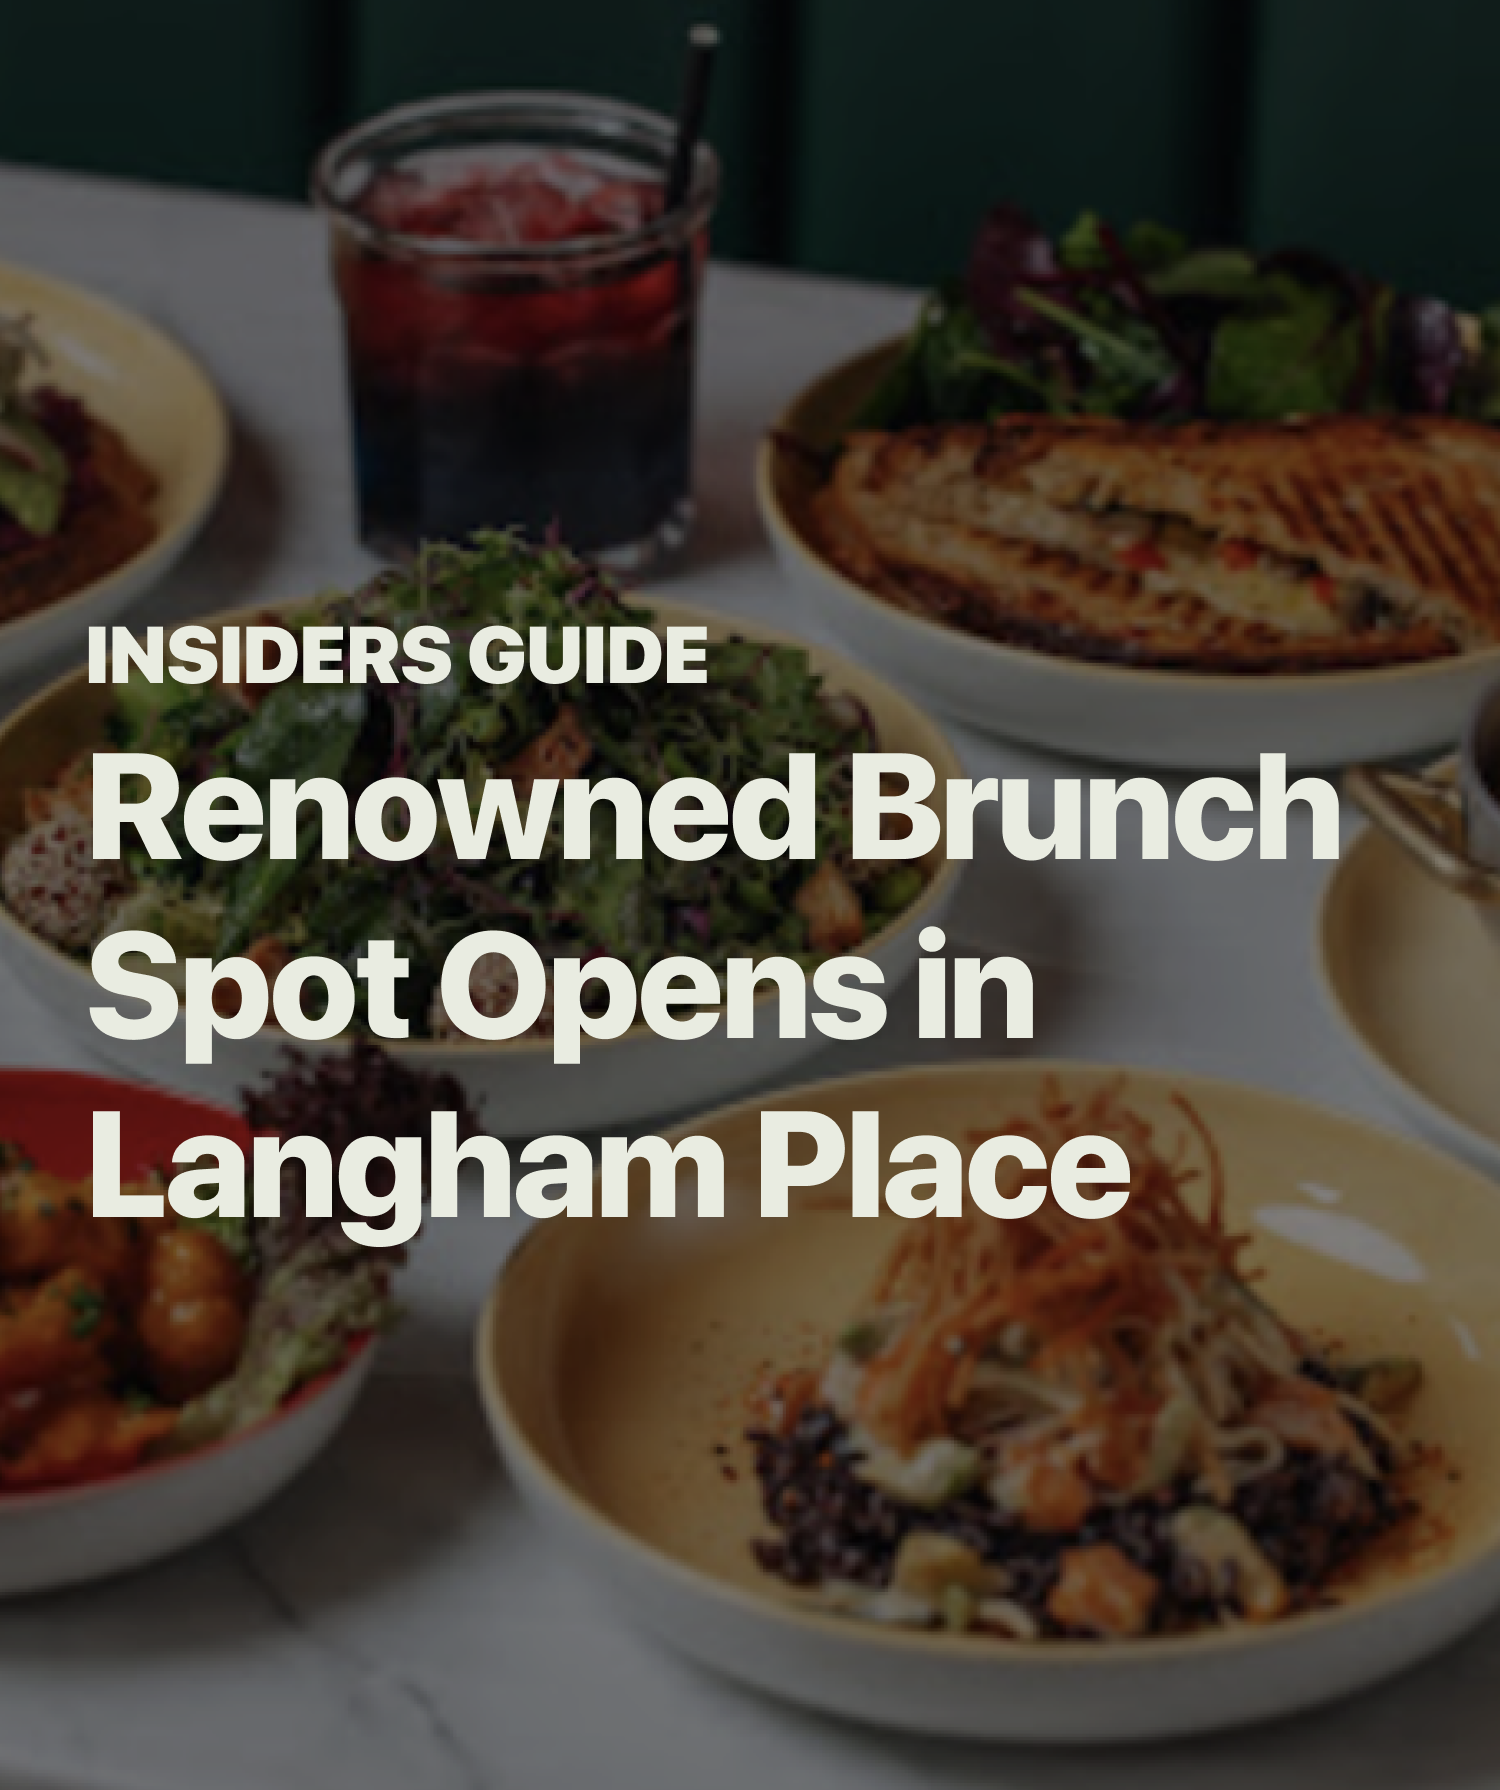 Renowned Brunch Spot Opens in Langham Place